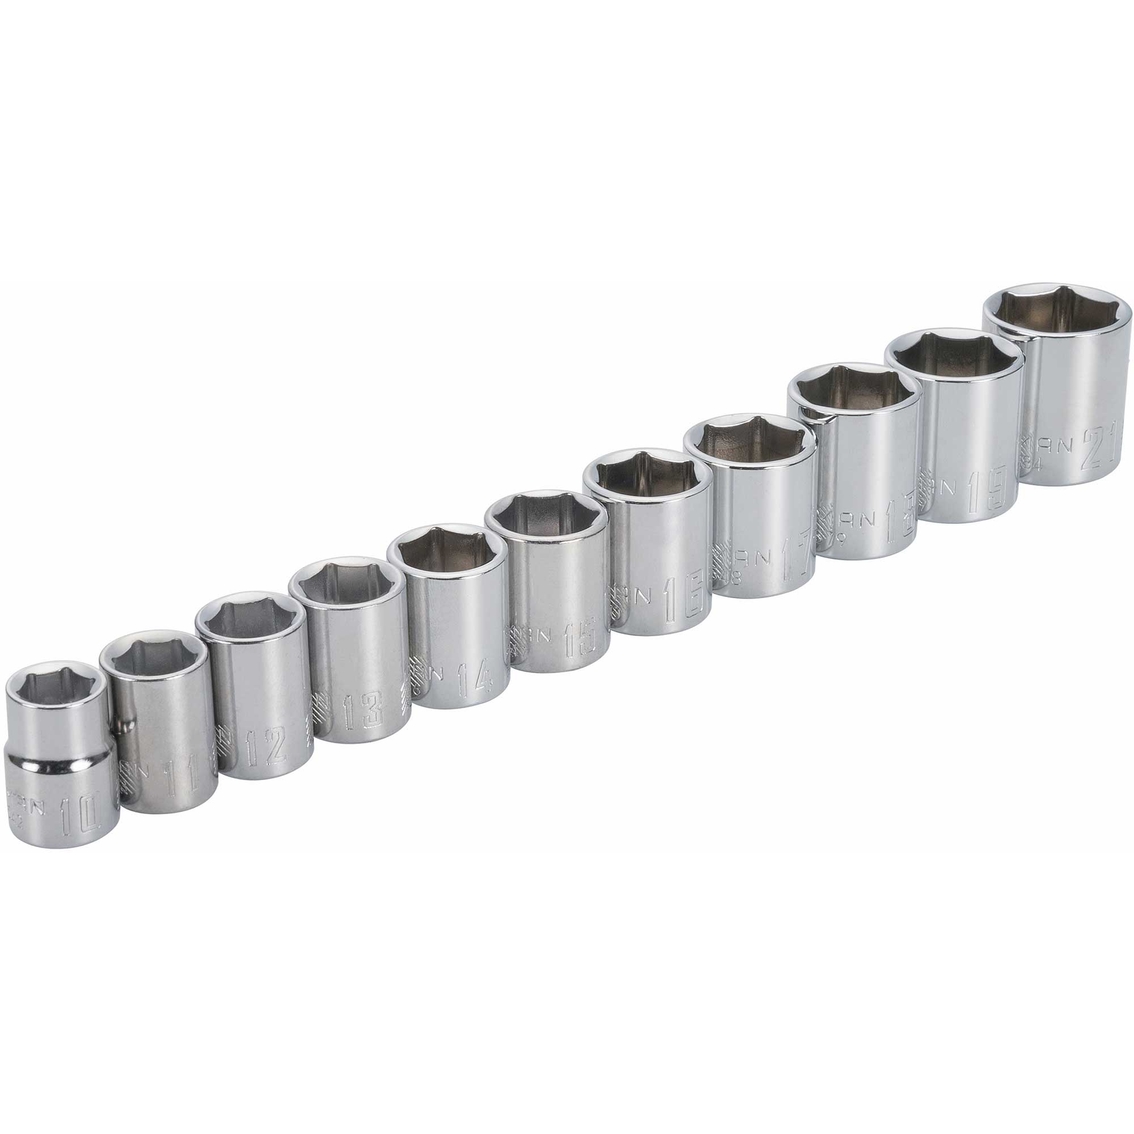 Craftsman 3/8 in. Drive Metric 6 Point 11 pc. Socket Set - Image 4 of 6